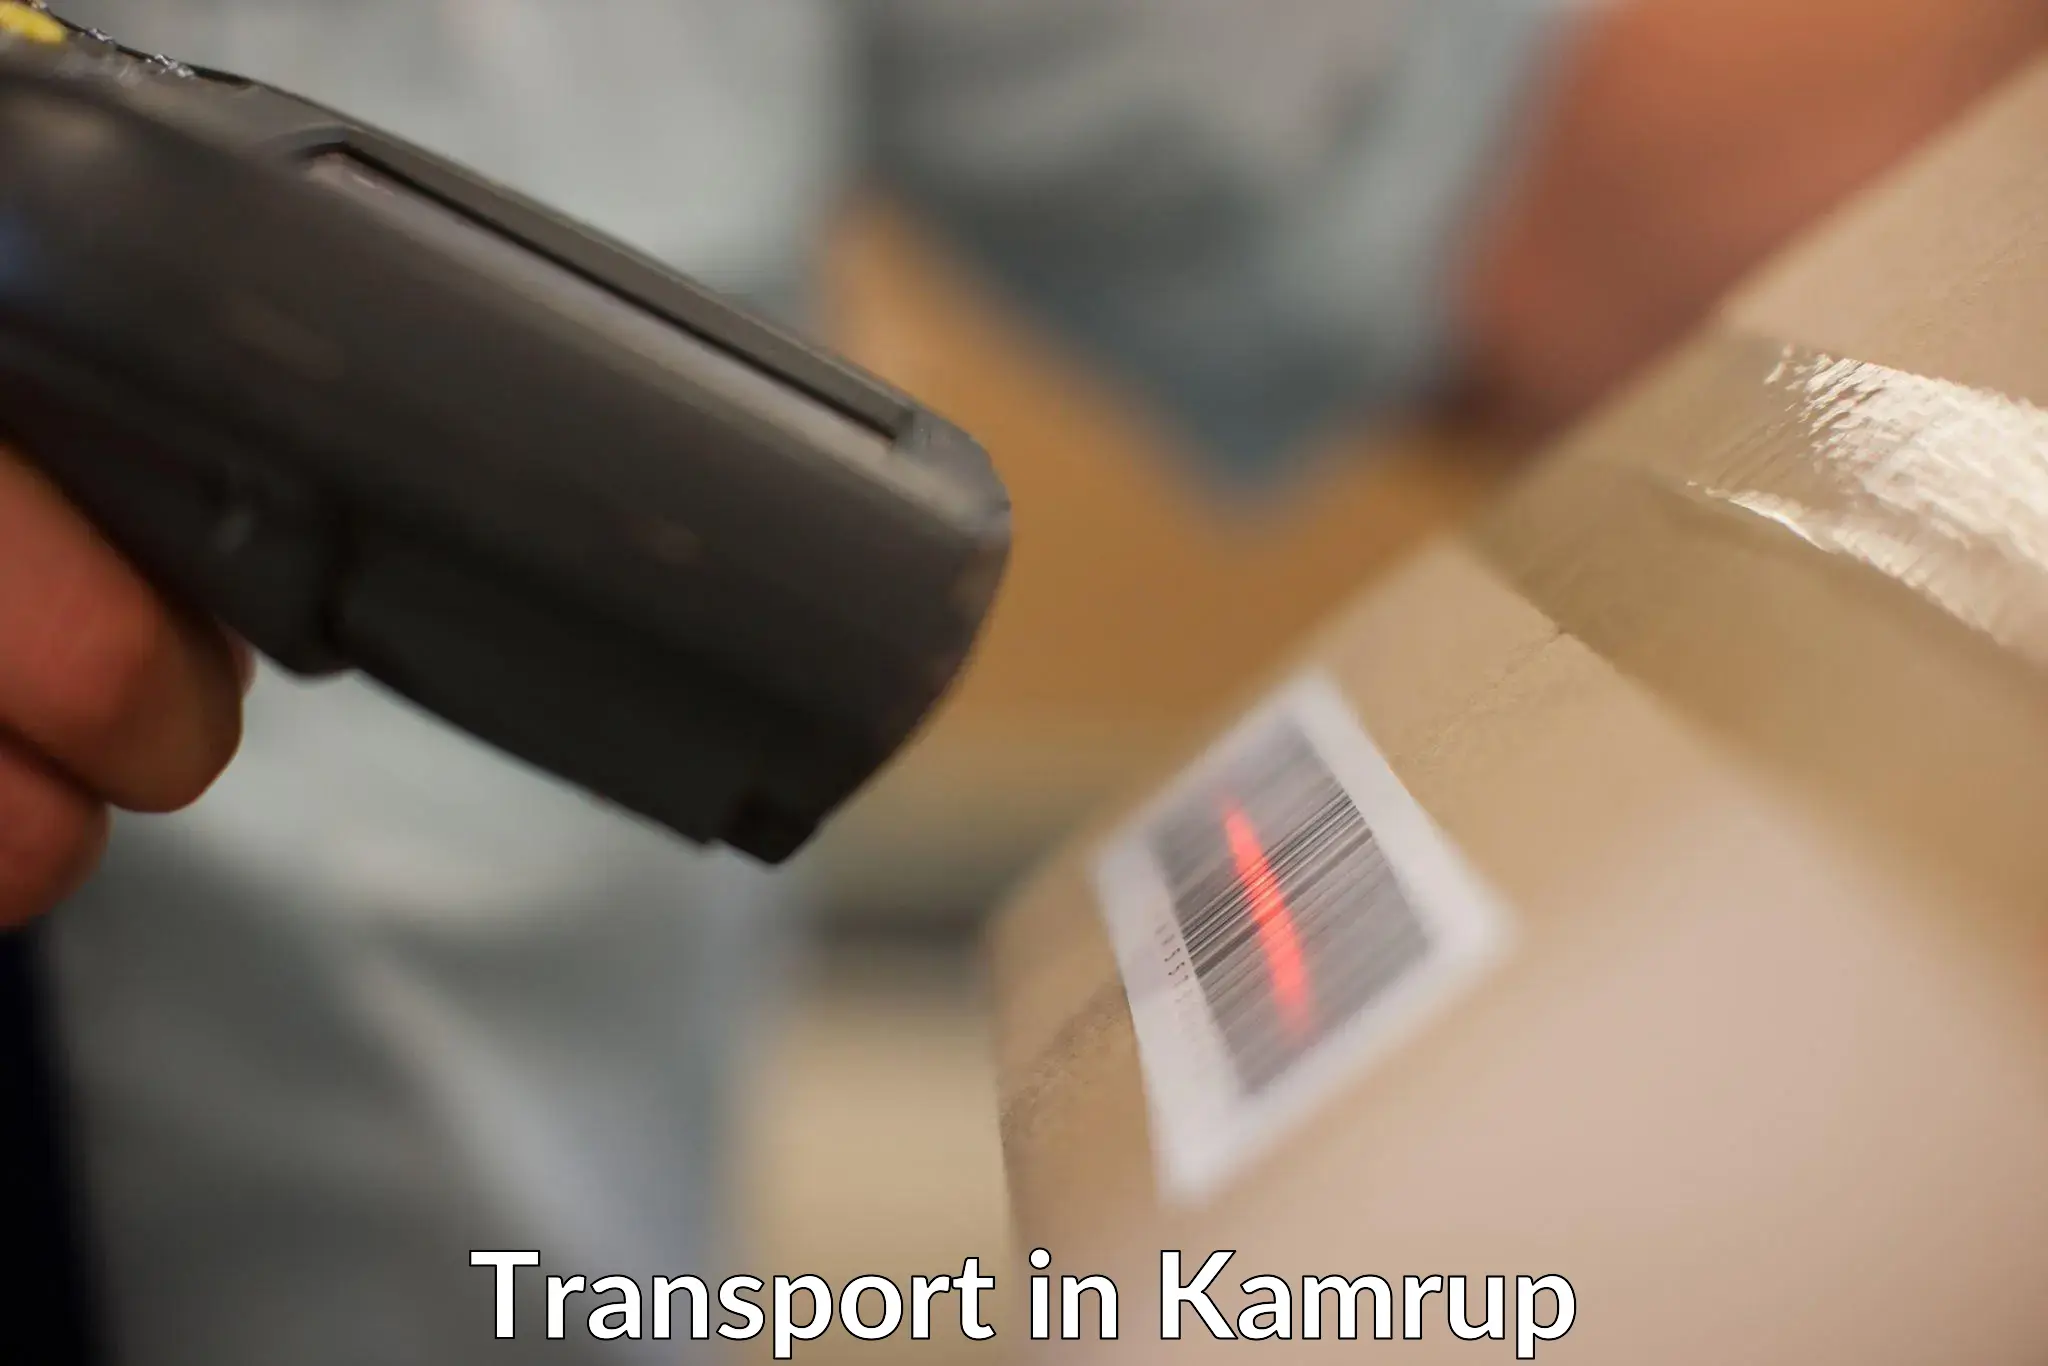 Express transport services in Kamrup